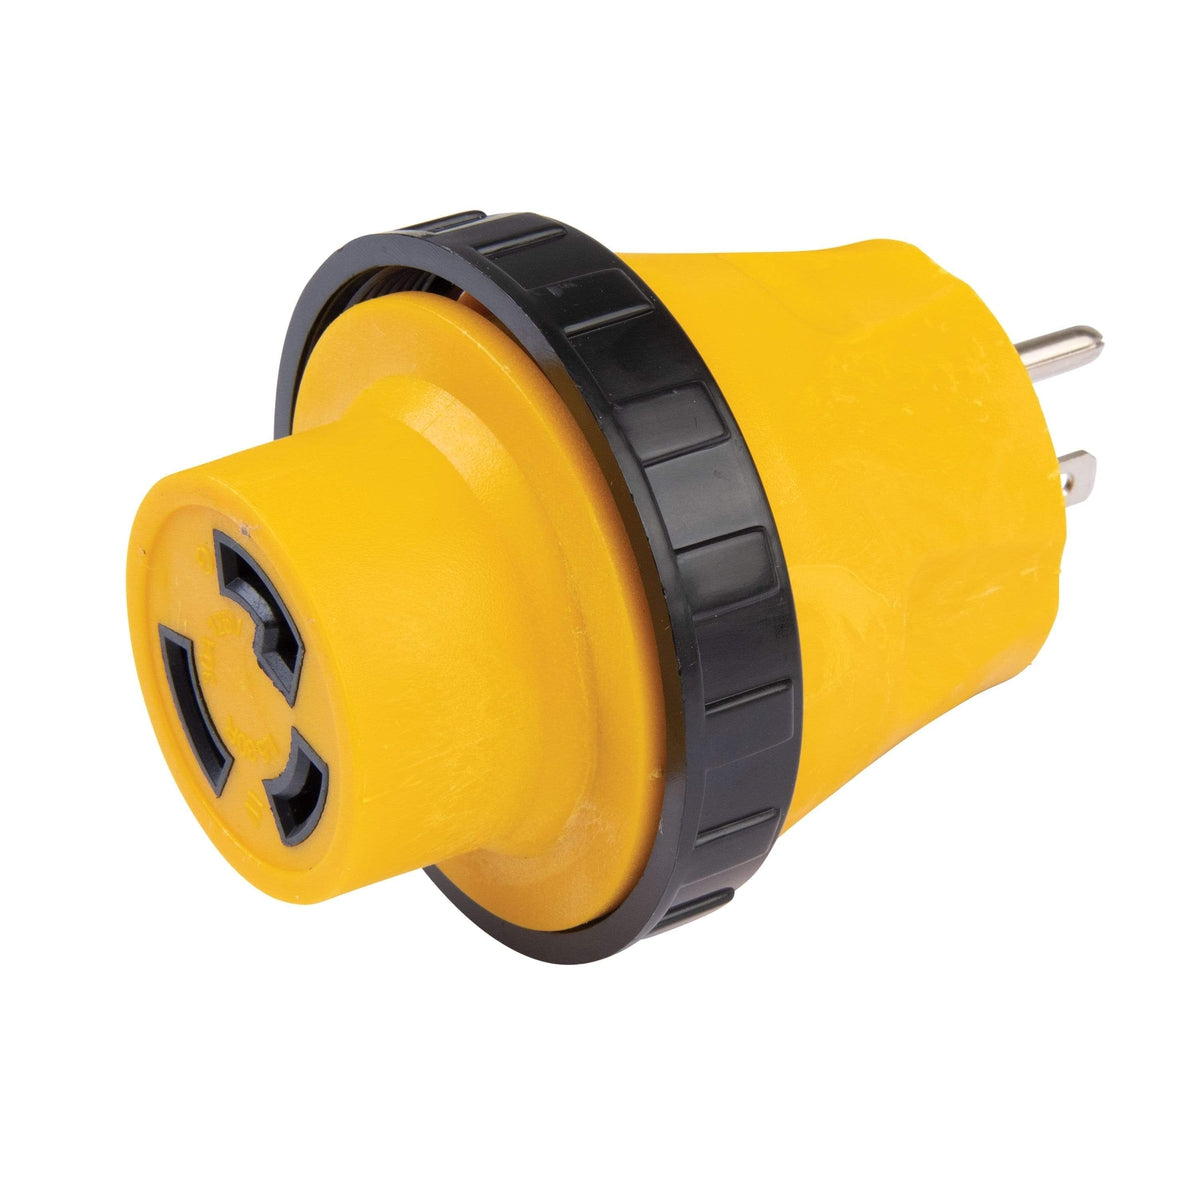 ParkPower 15a Male 30a Female Adapter #1530RVTLA